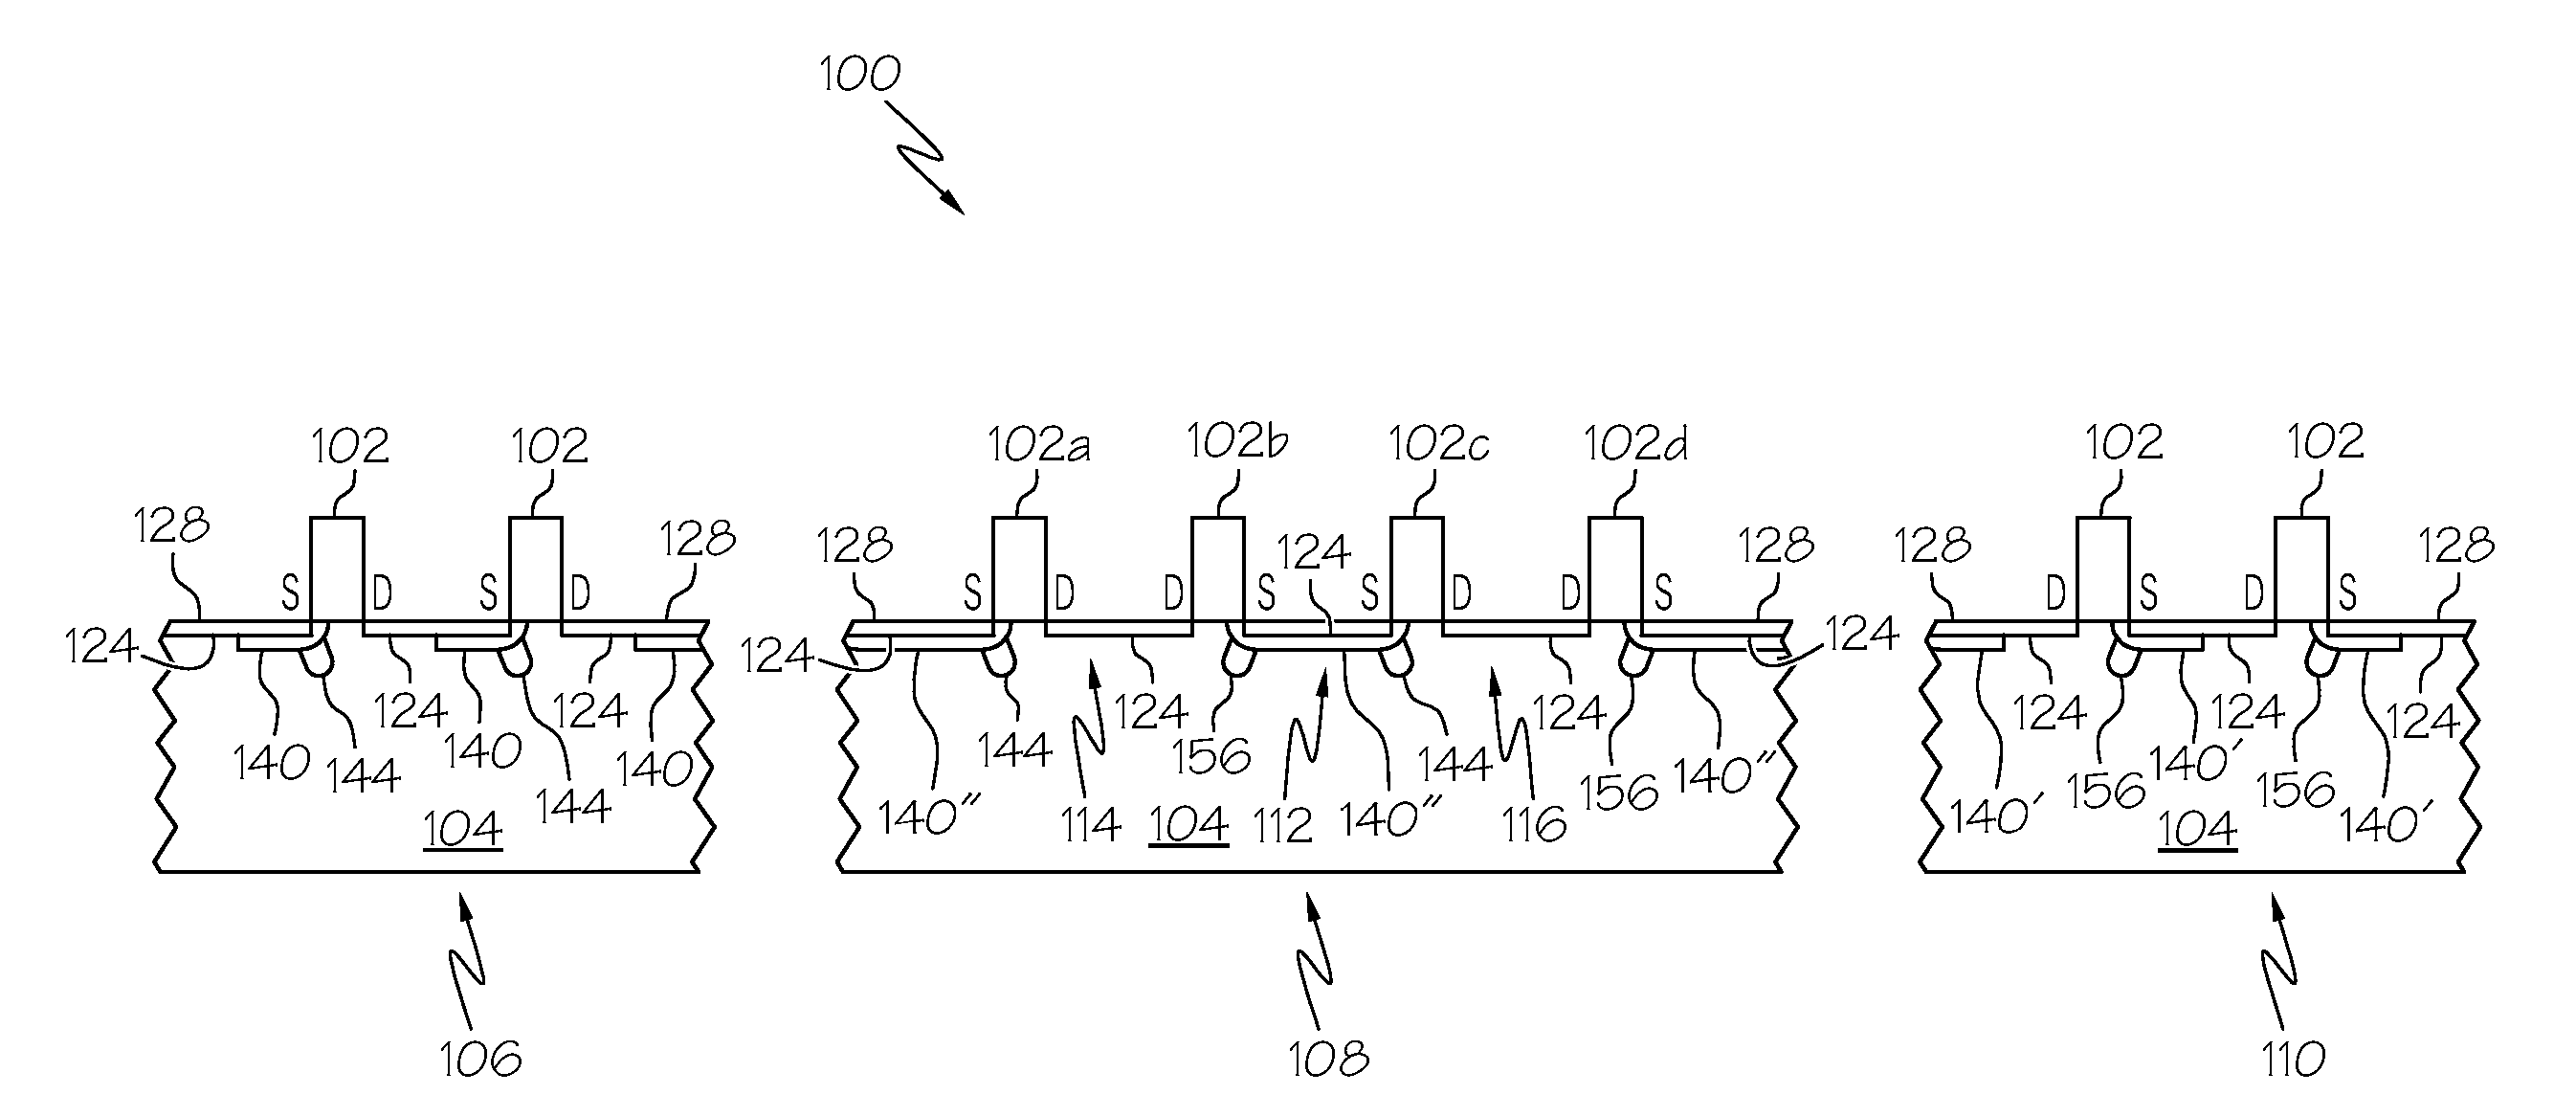 Method of fabricating semiconductor transistor devices with asymmetric extension and/or halo implants